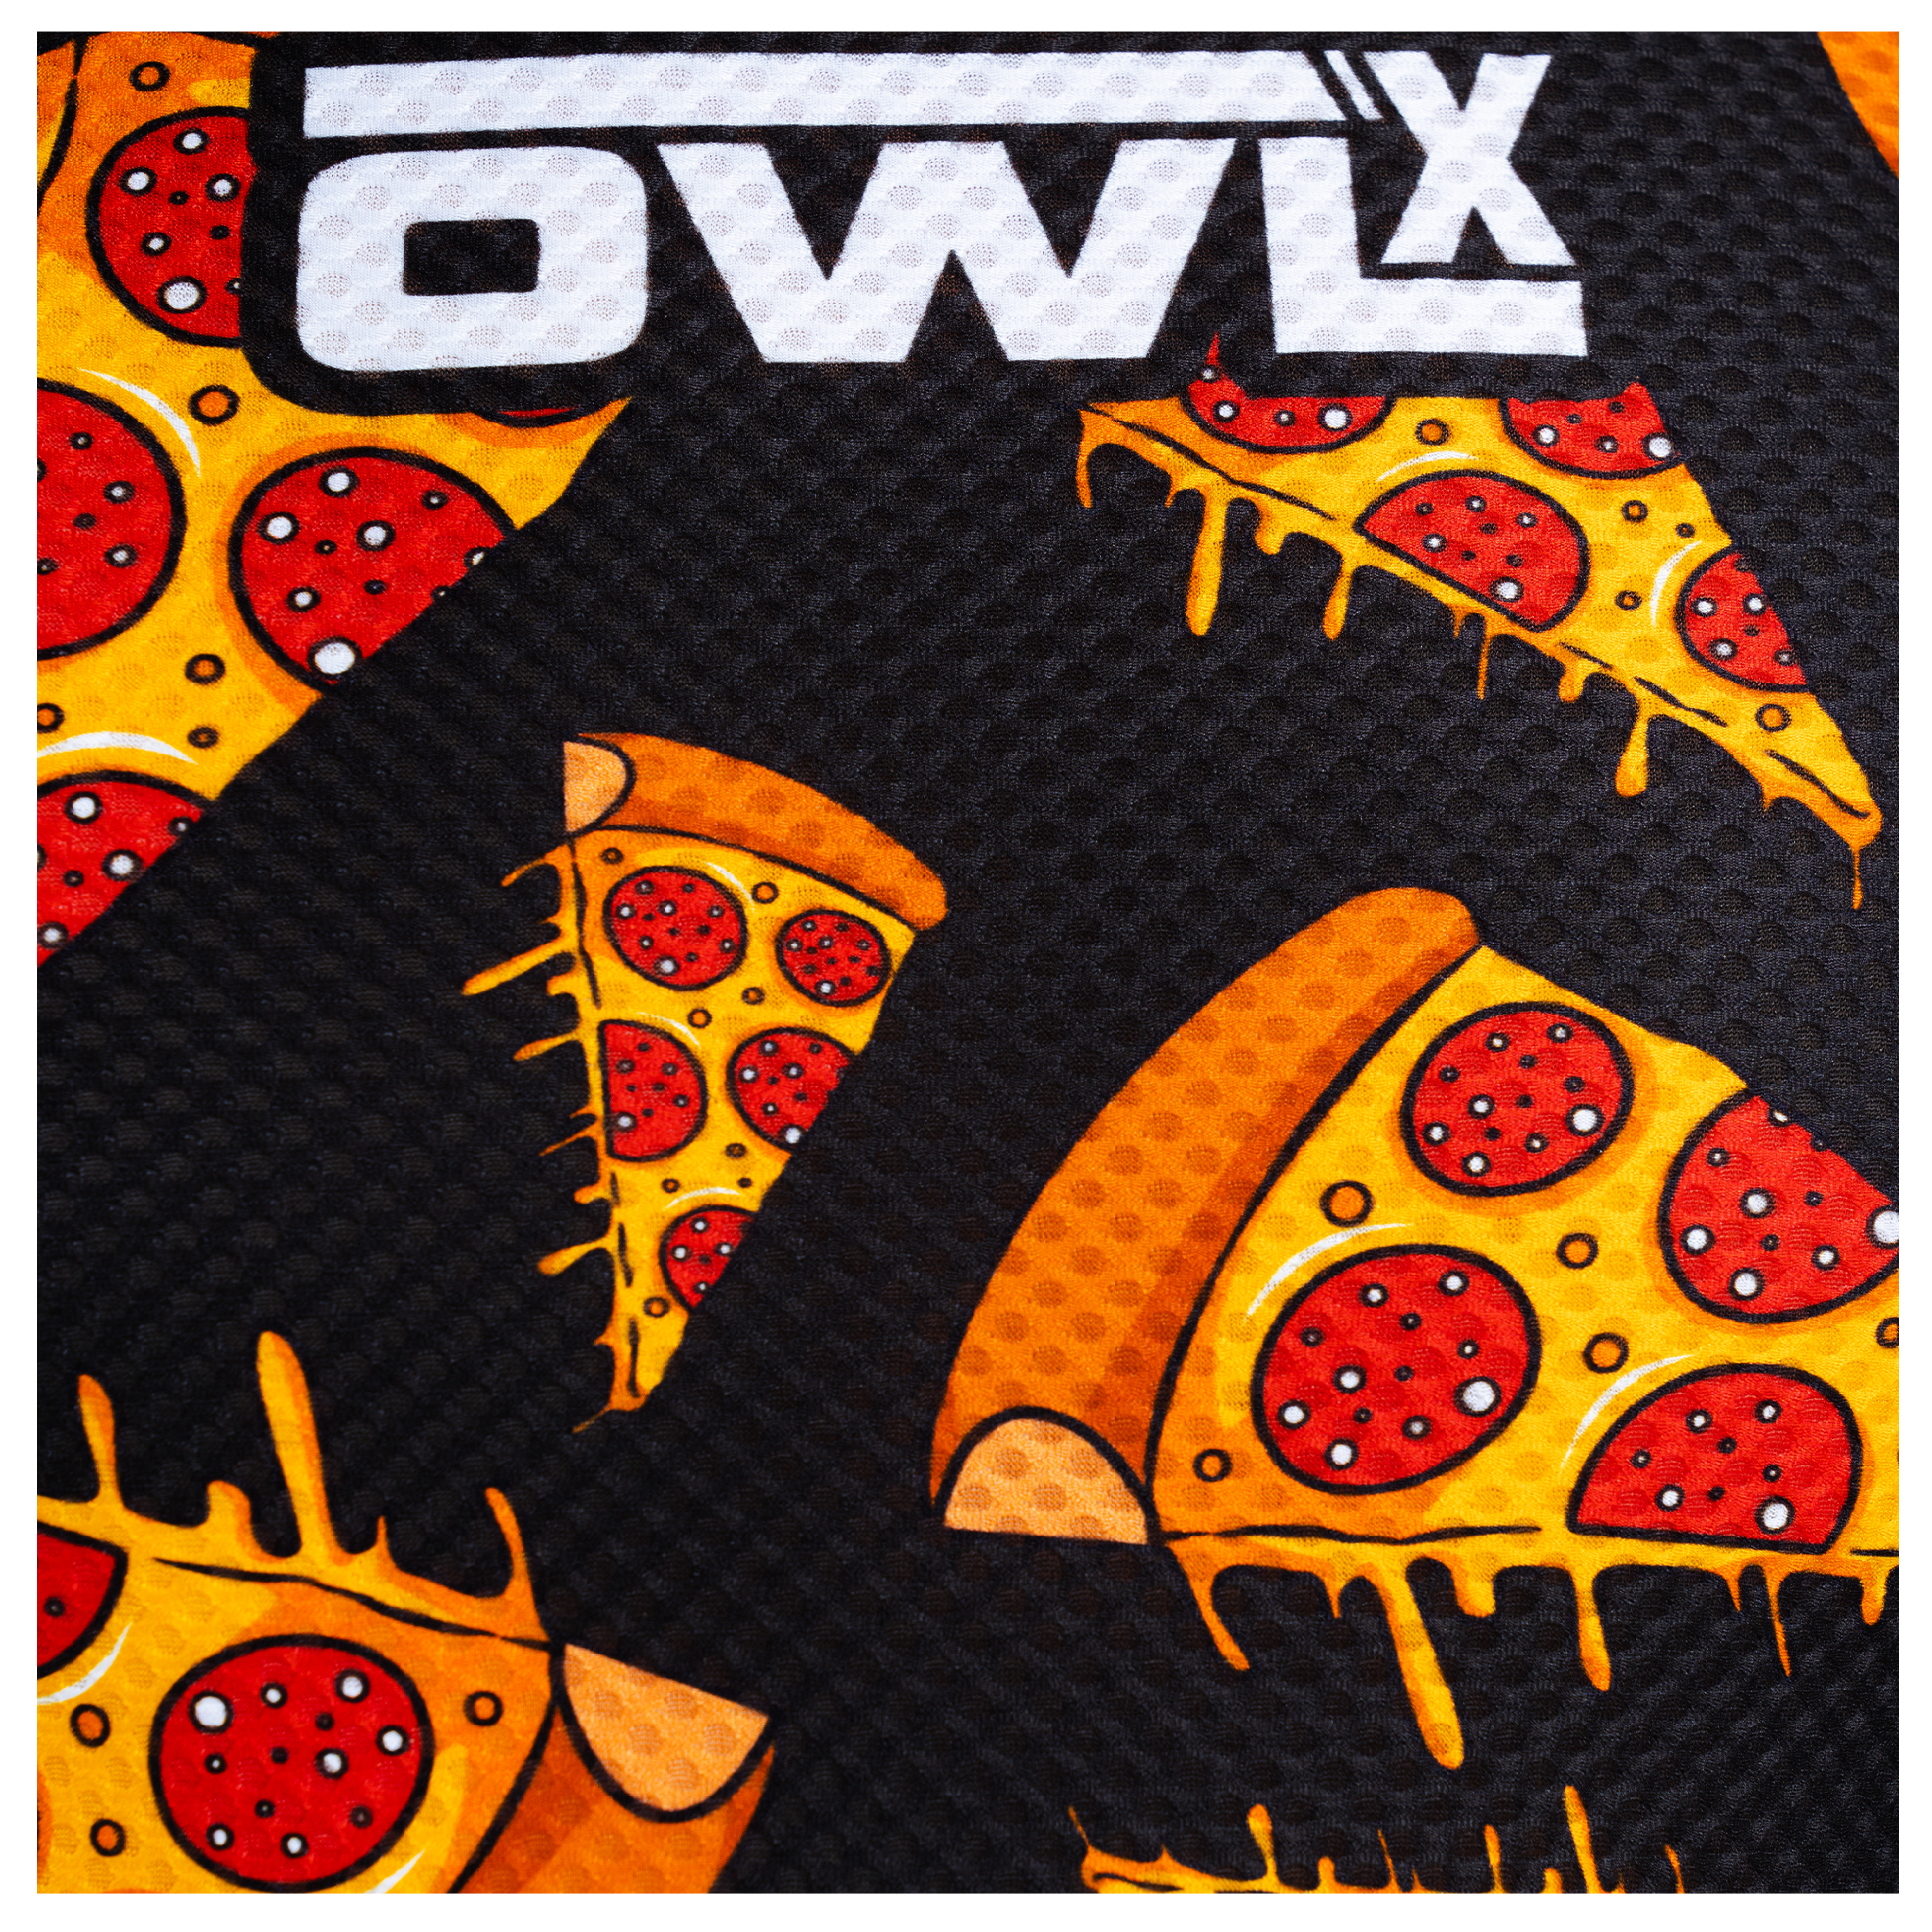 PIZZA JERSEY